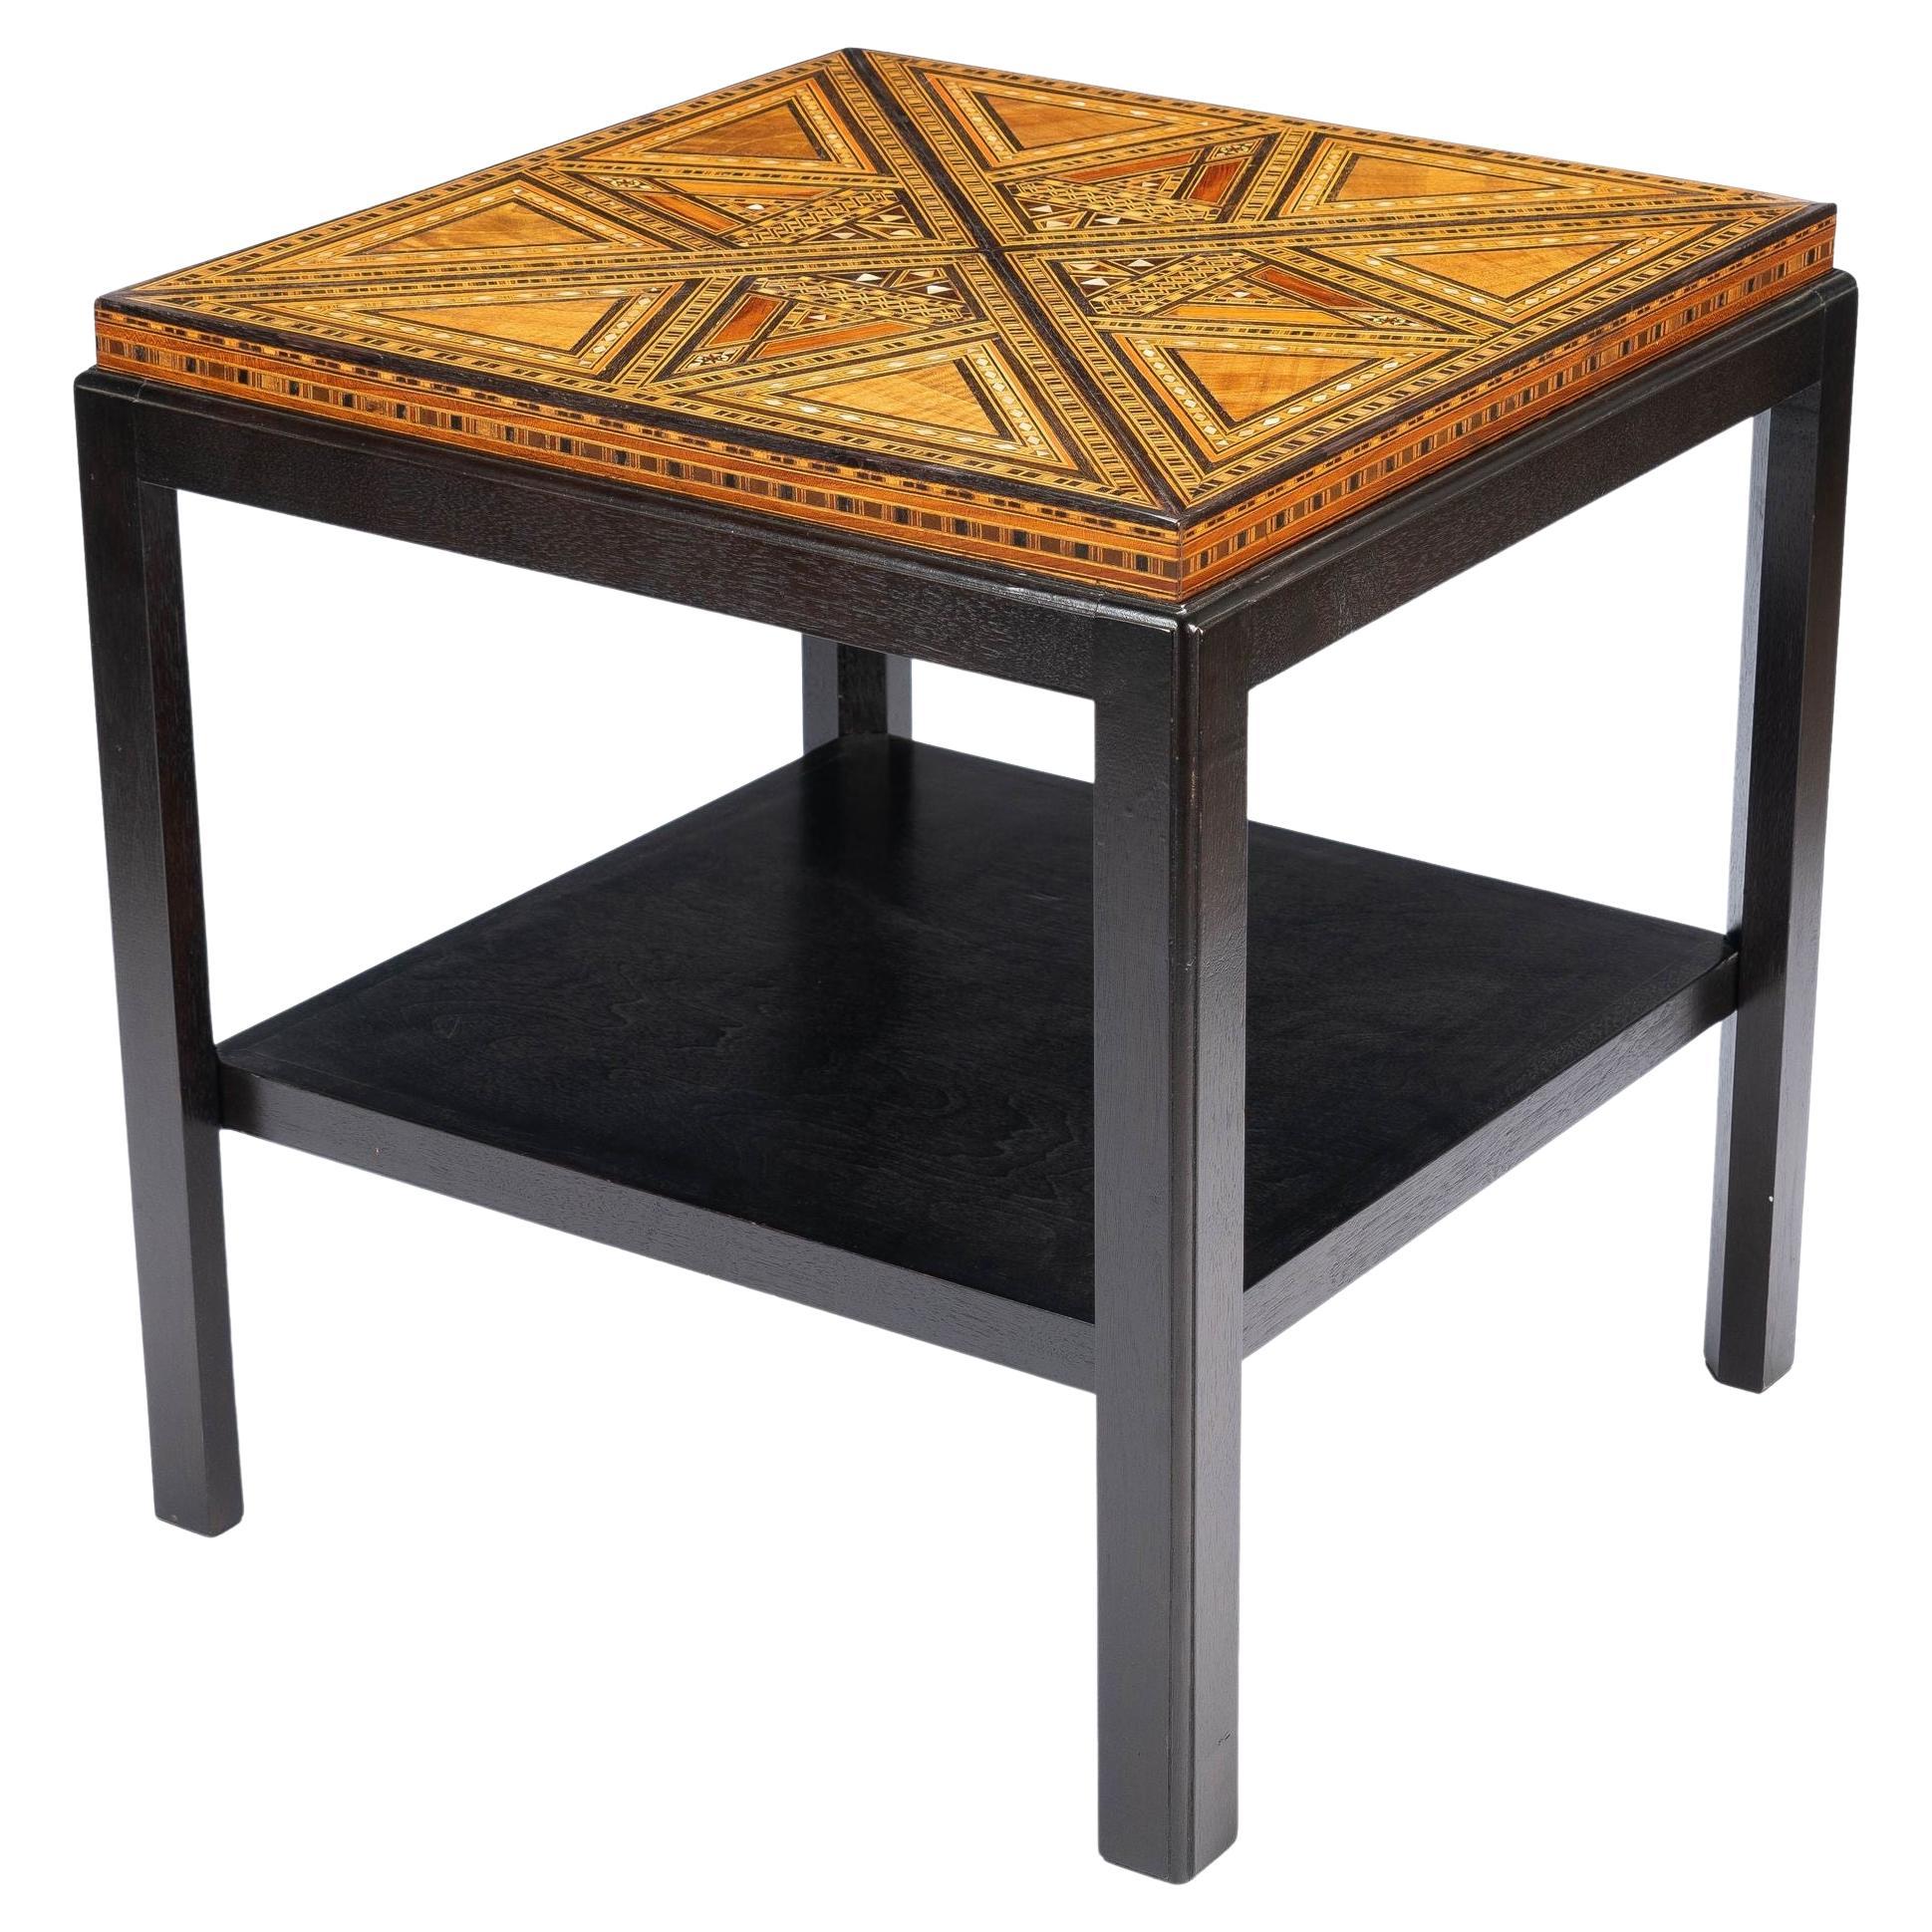 Damascus Inlaid Table Top on Custom Stand, c. 1900